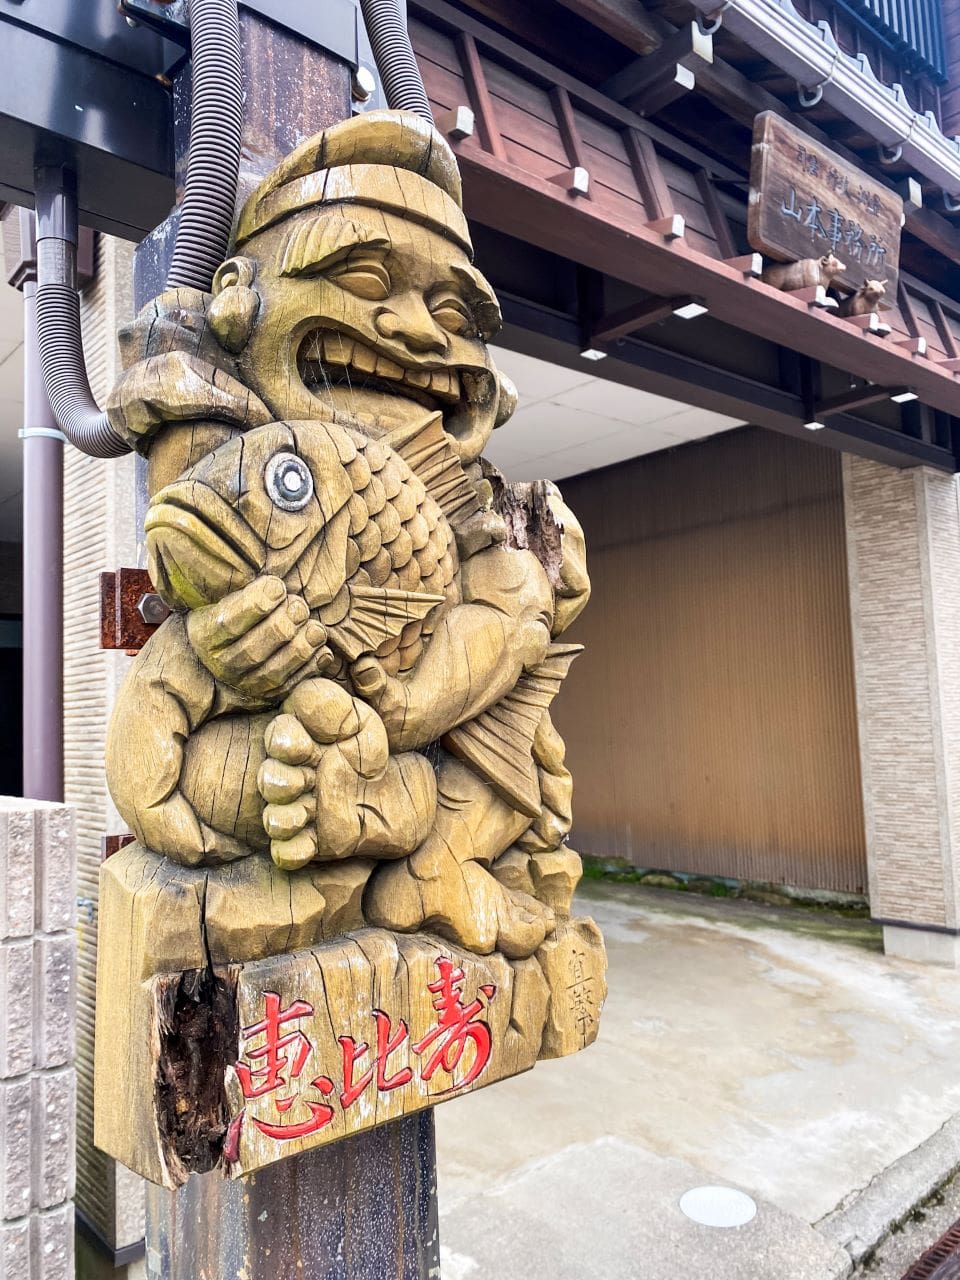 Wood carvings in Inami district